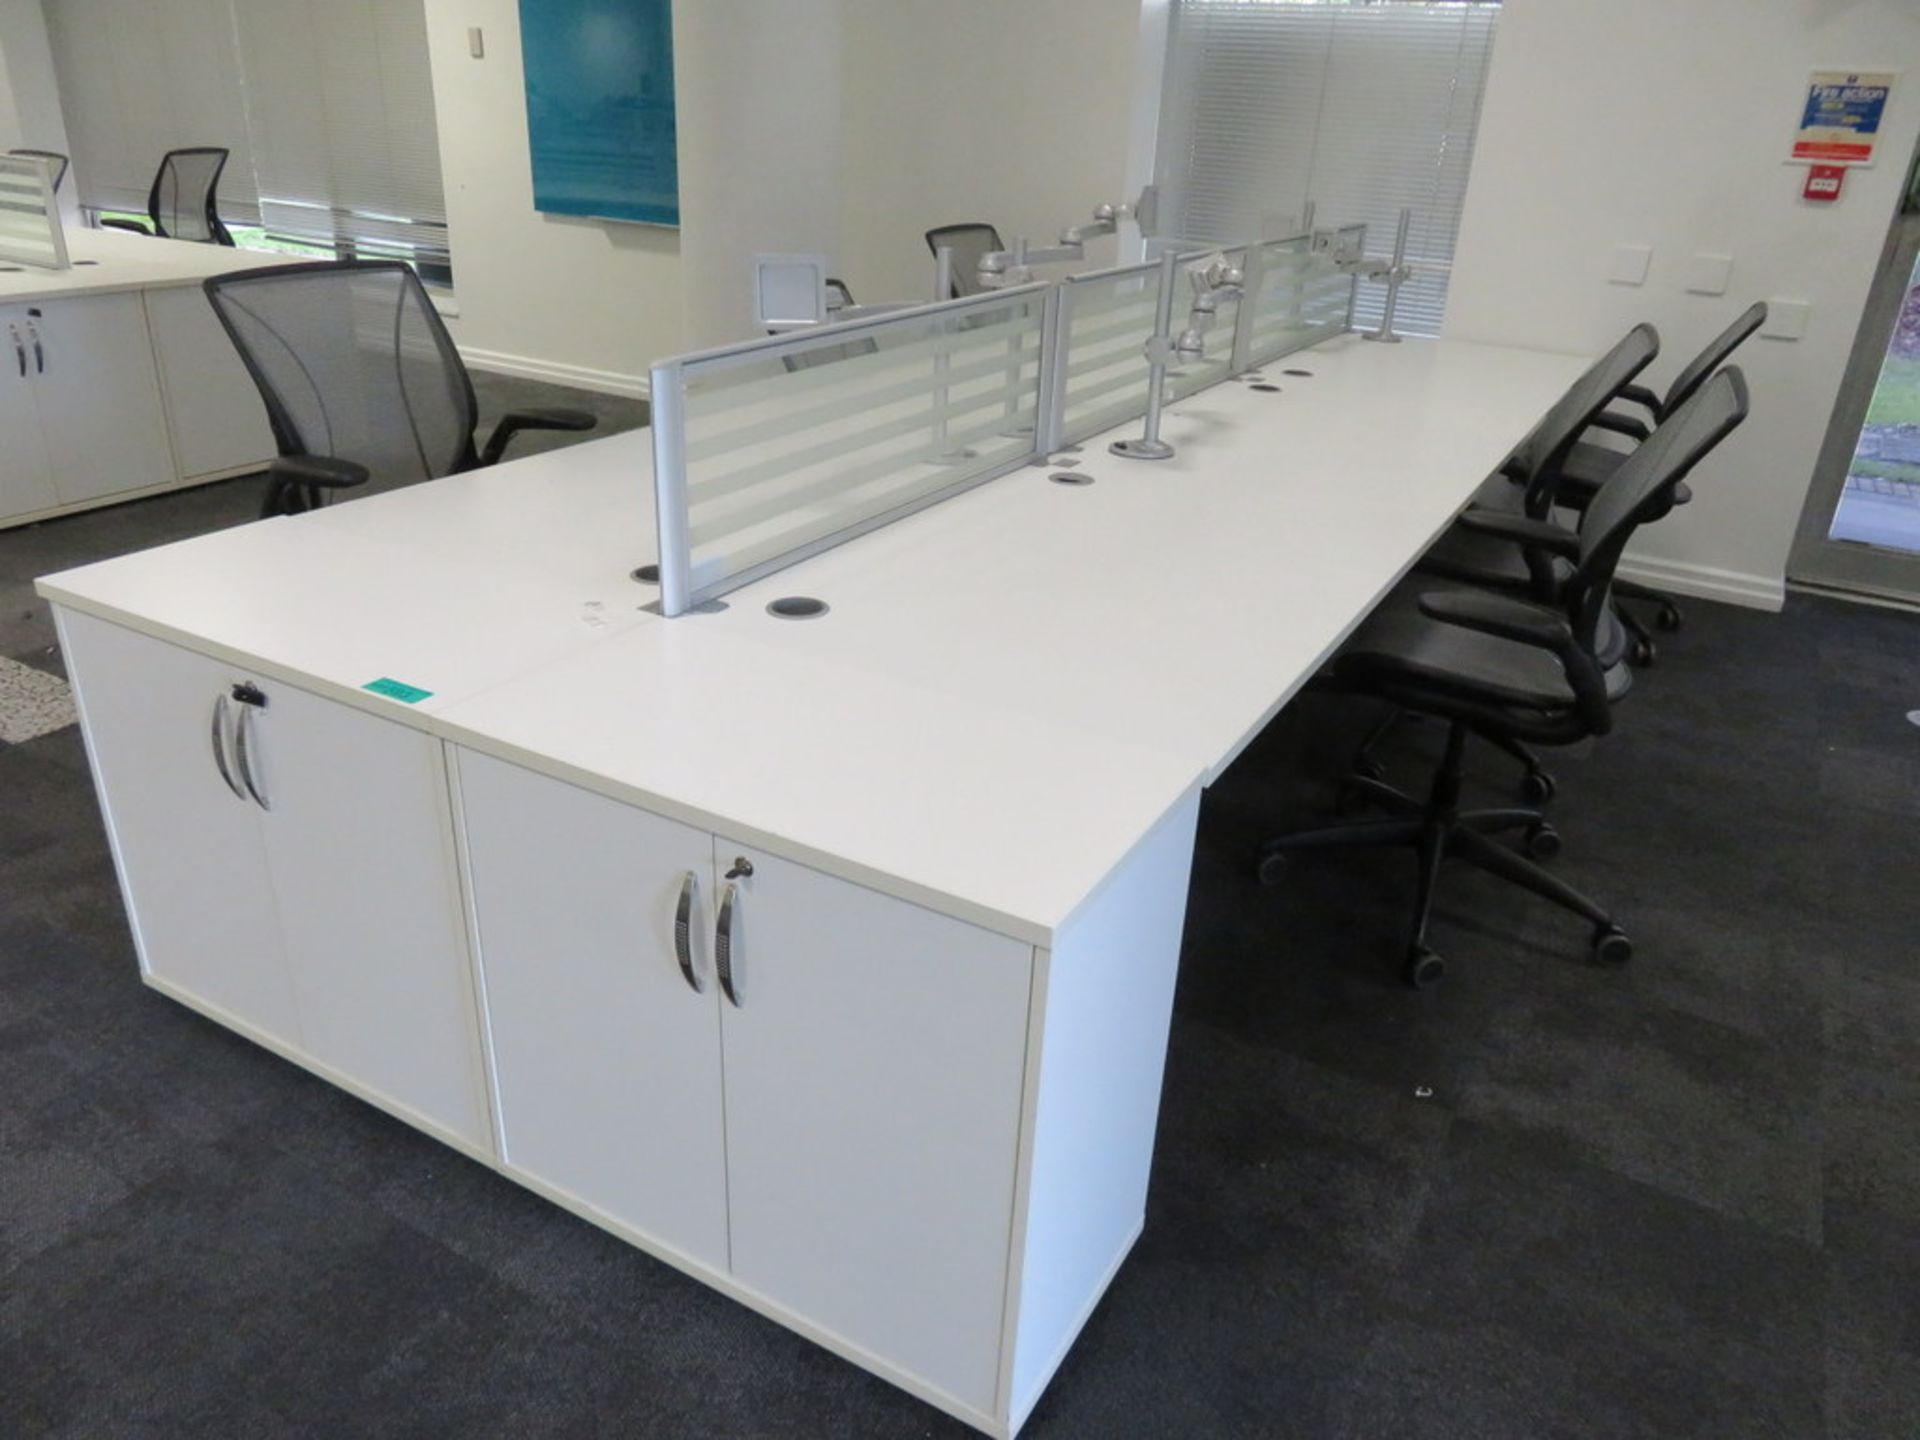 6 Person Desk Arrangement With Dividers, Monitor Arms & Storage Cupboards. Chairs Are Not Included.